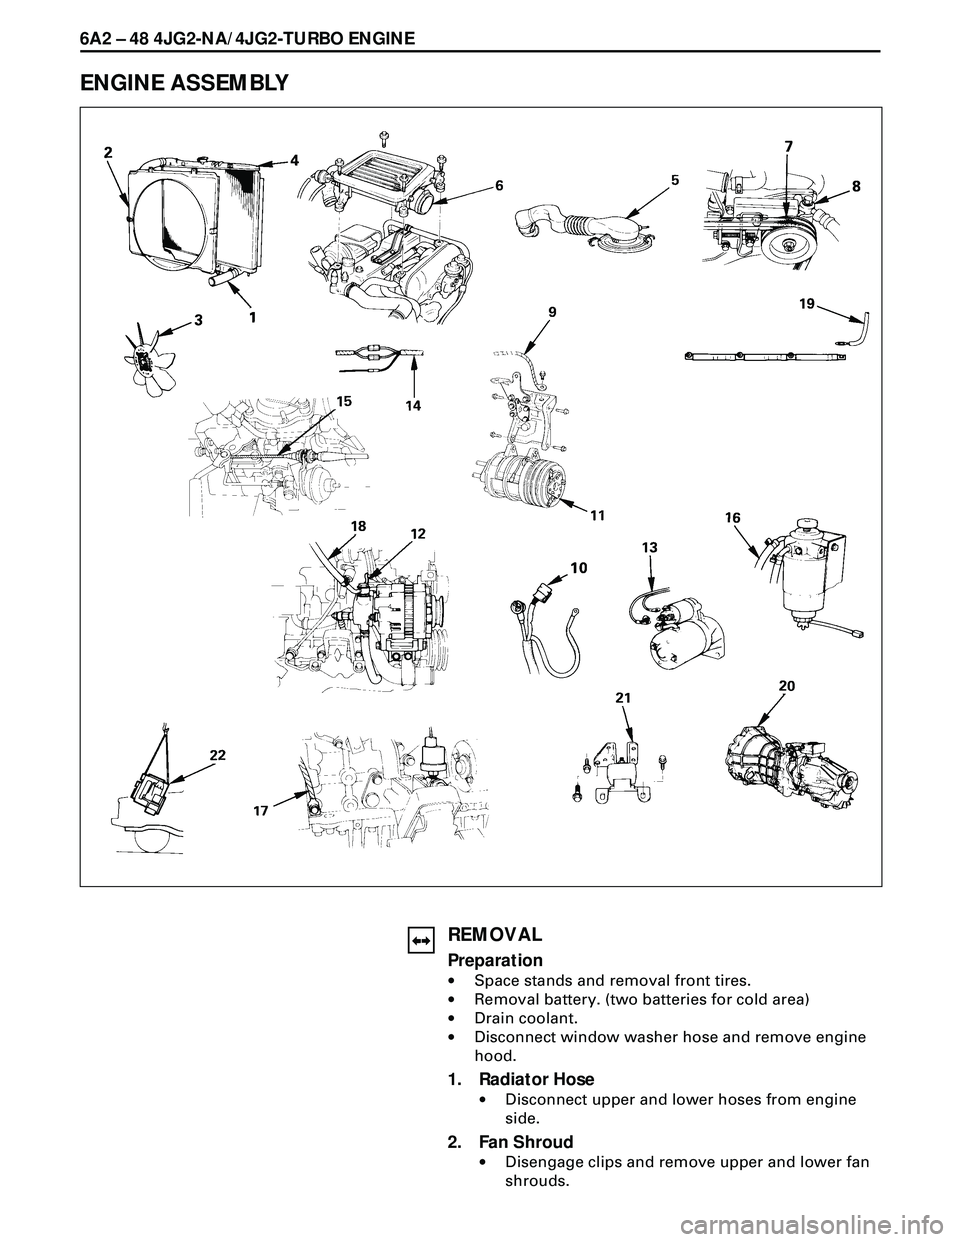 ISUZU TROOPER 1998  Service Repair Manual 6A2 Ð 48 4JG2-NA/4JG2-TURBO ENGINE
ENGINE ASSEMBLY
REMOVAL
Preparation
·Space stands and removal front tires.
·Removal battery. (two batteries for cold area)
·Drain coolant.
·Disconnect window wa